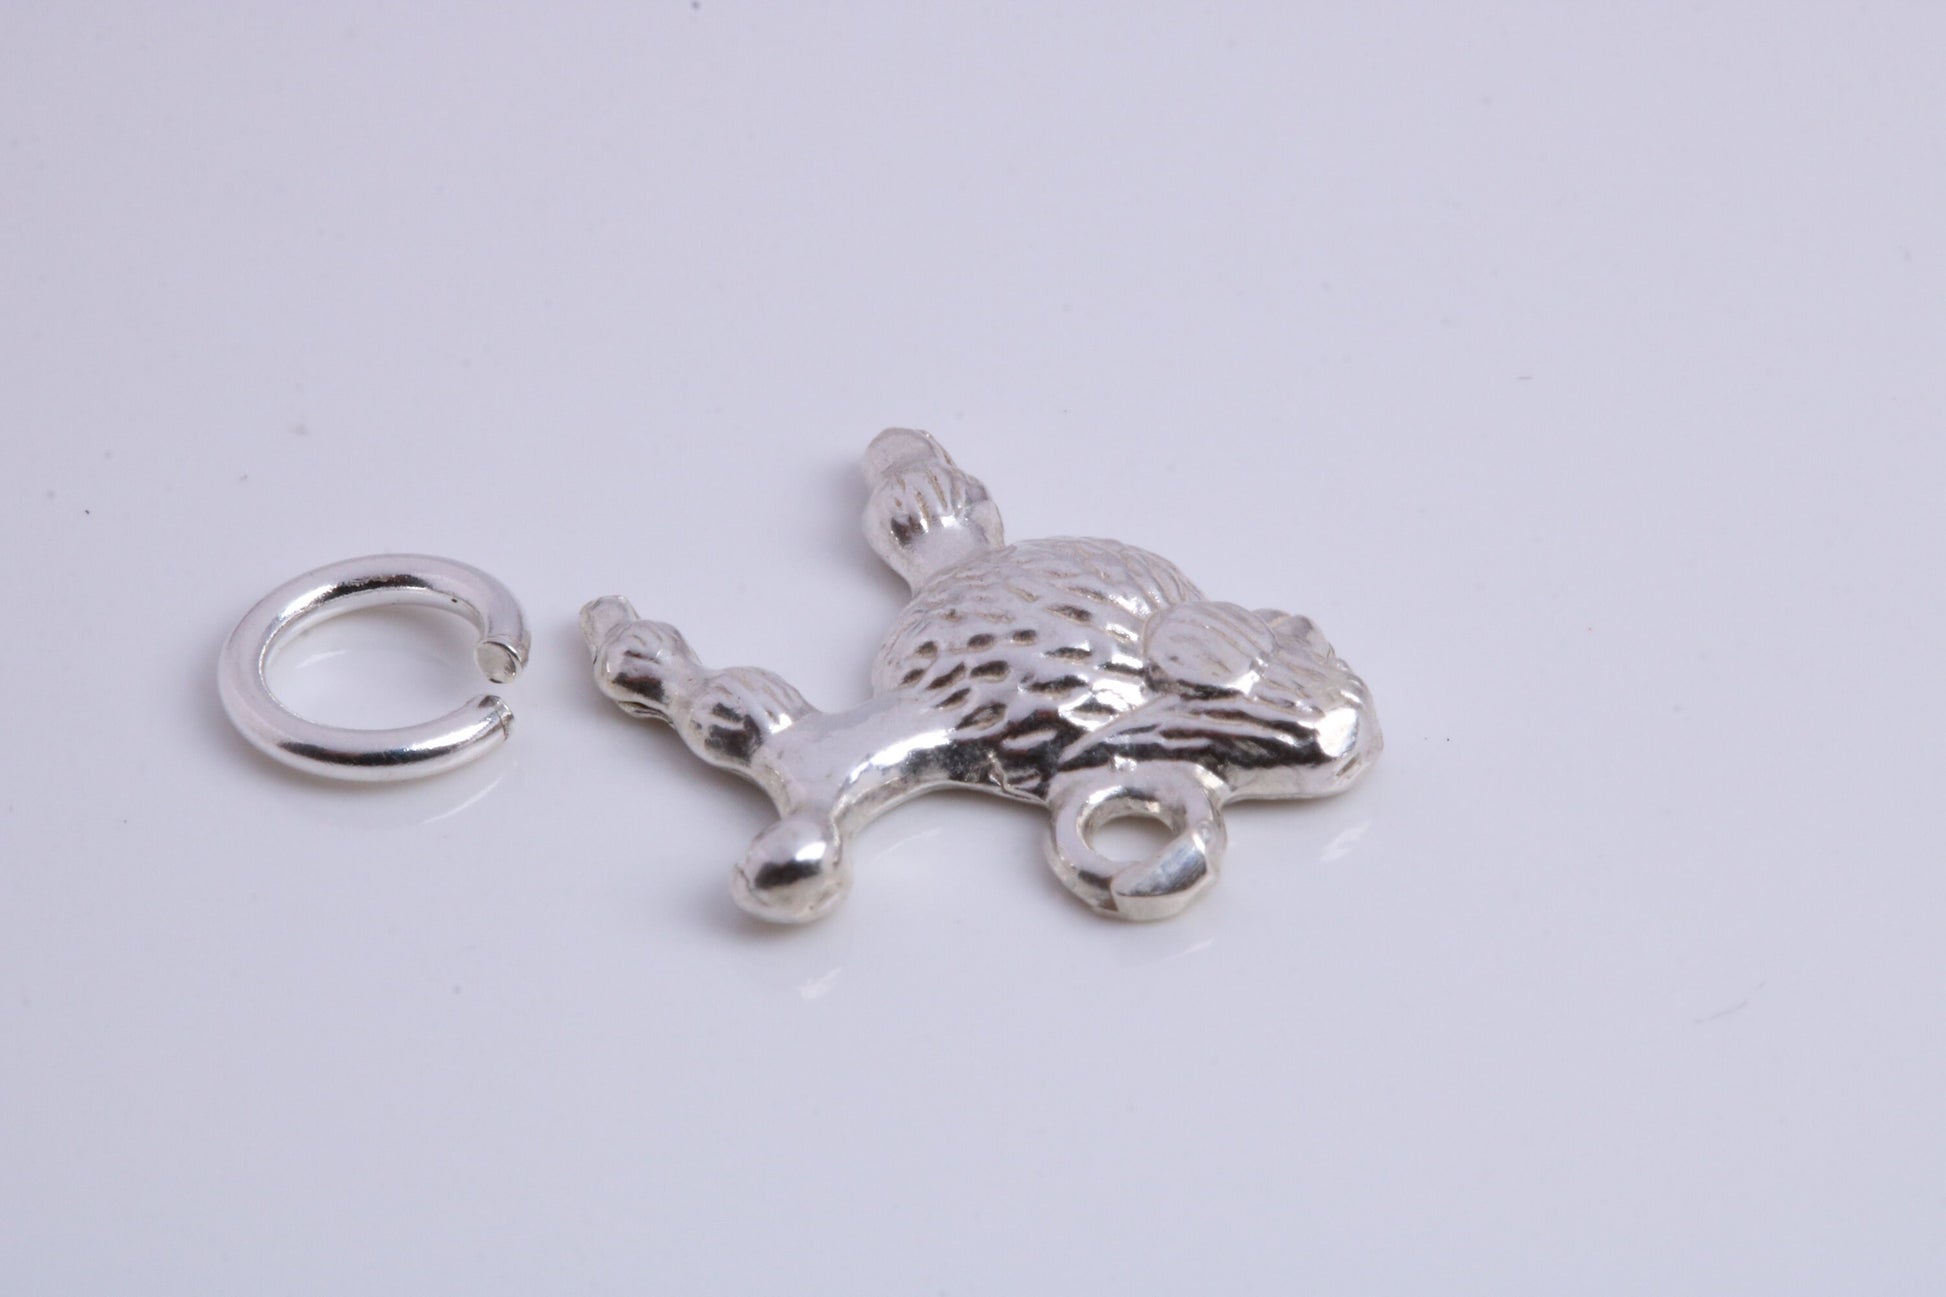 Poodle Dog Charm, Traditional Charm, Made from Solid 925 Grade Sterling Silver, Complete with Attachment Link